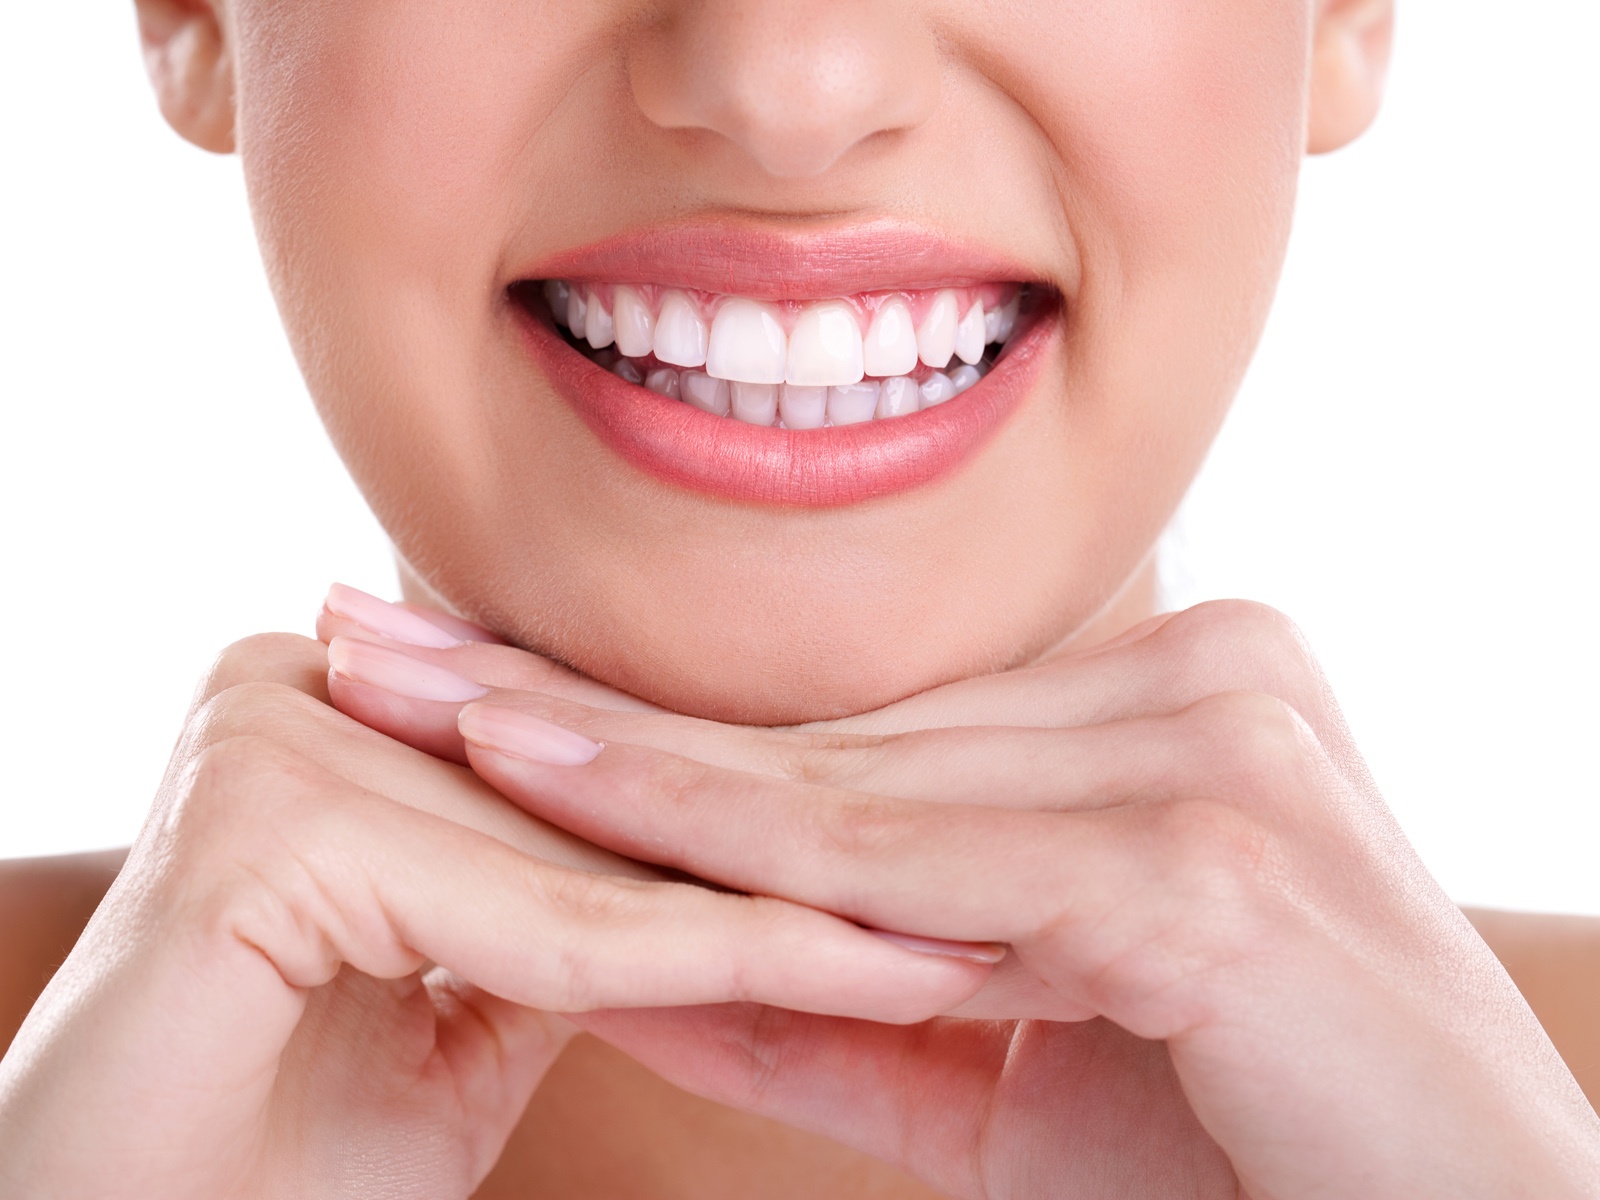 Tips to Help Keep Your Teeth White